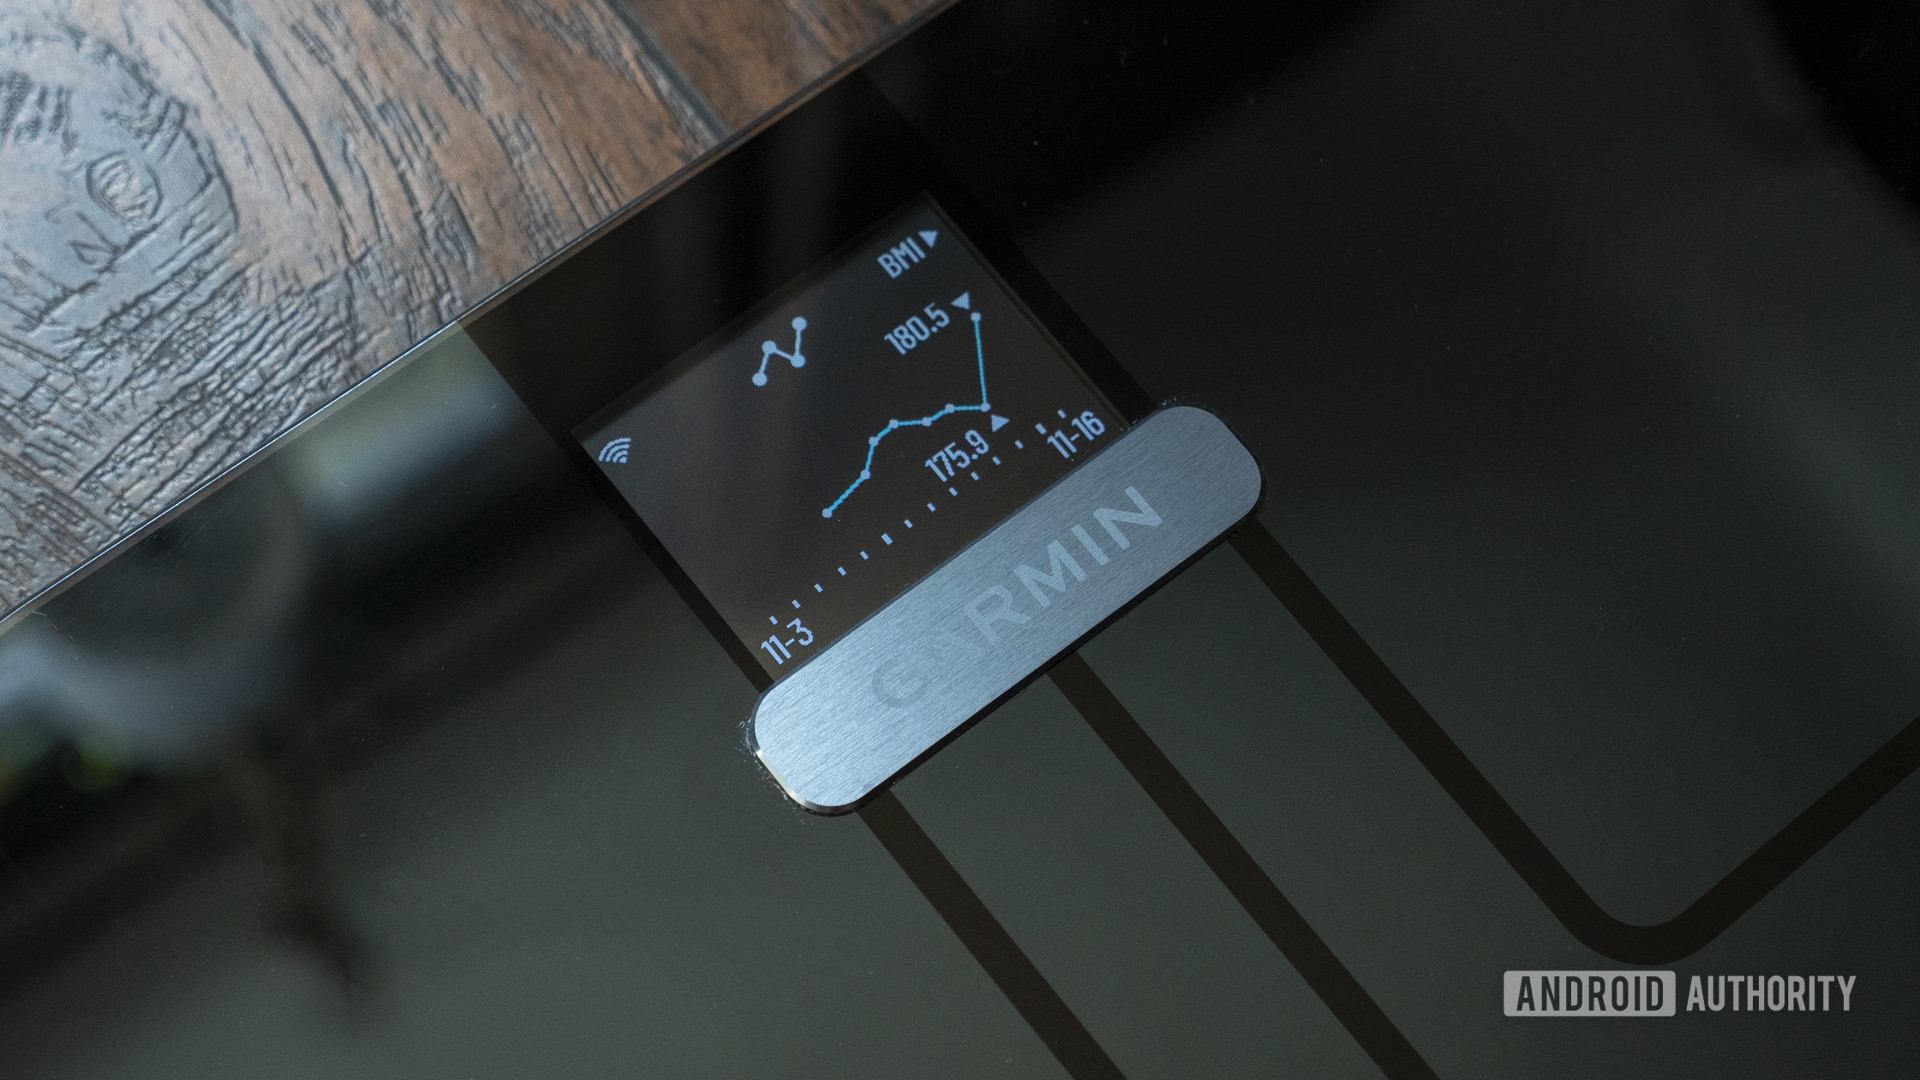 https://www.androidauthority.com/wp-content/uploads/2020/11/garmin-index-s2-smart-scale-review-30-day-weight-trend.jpg